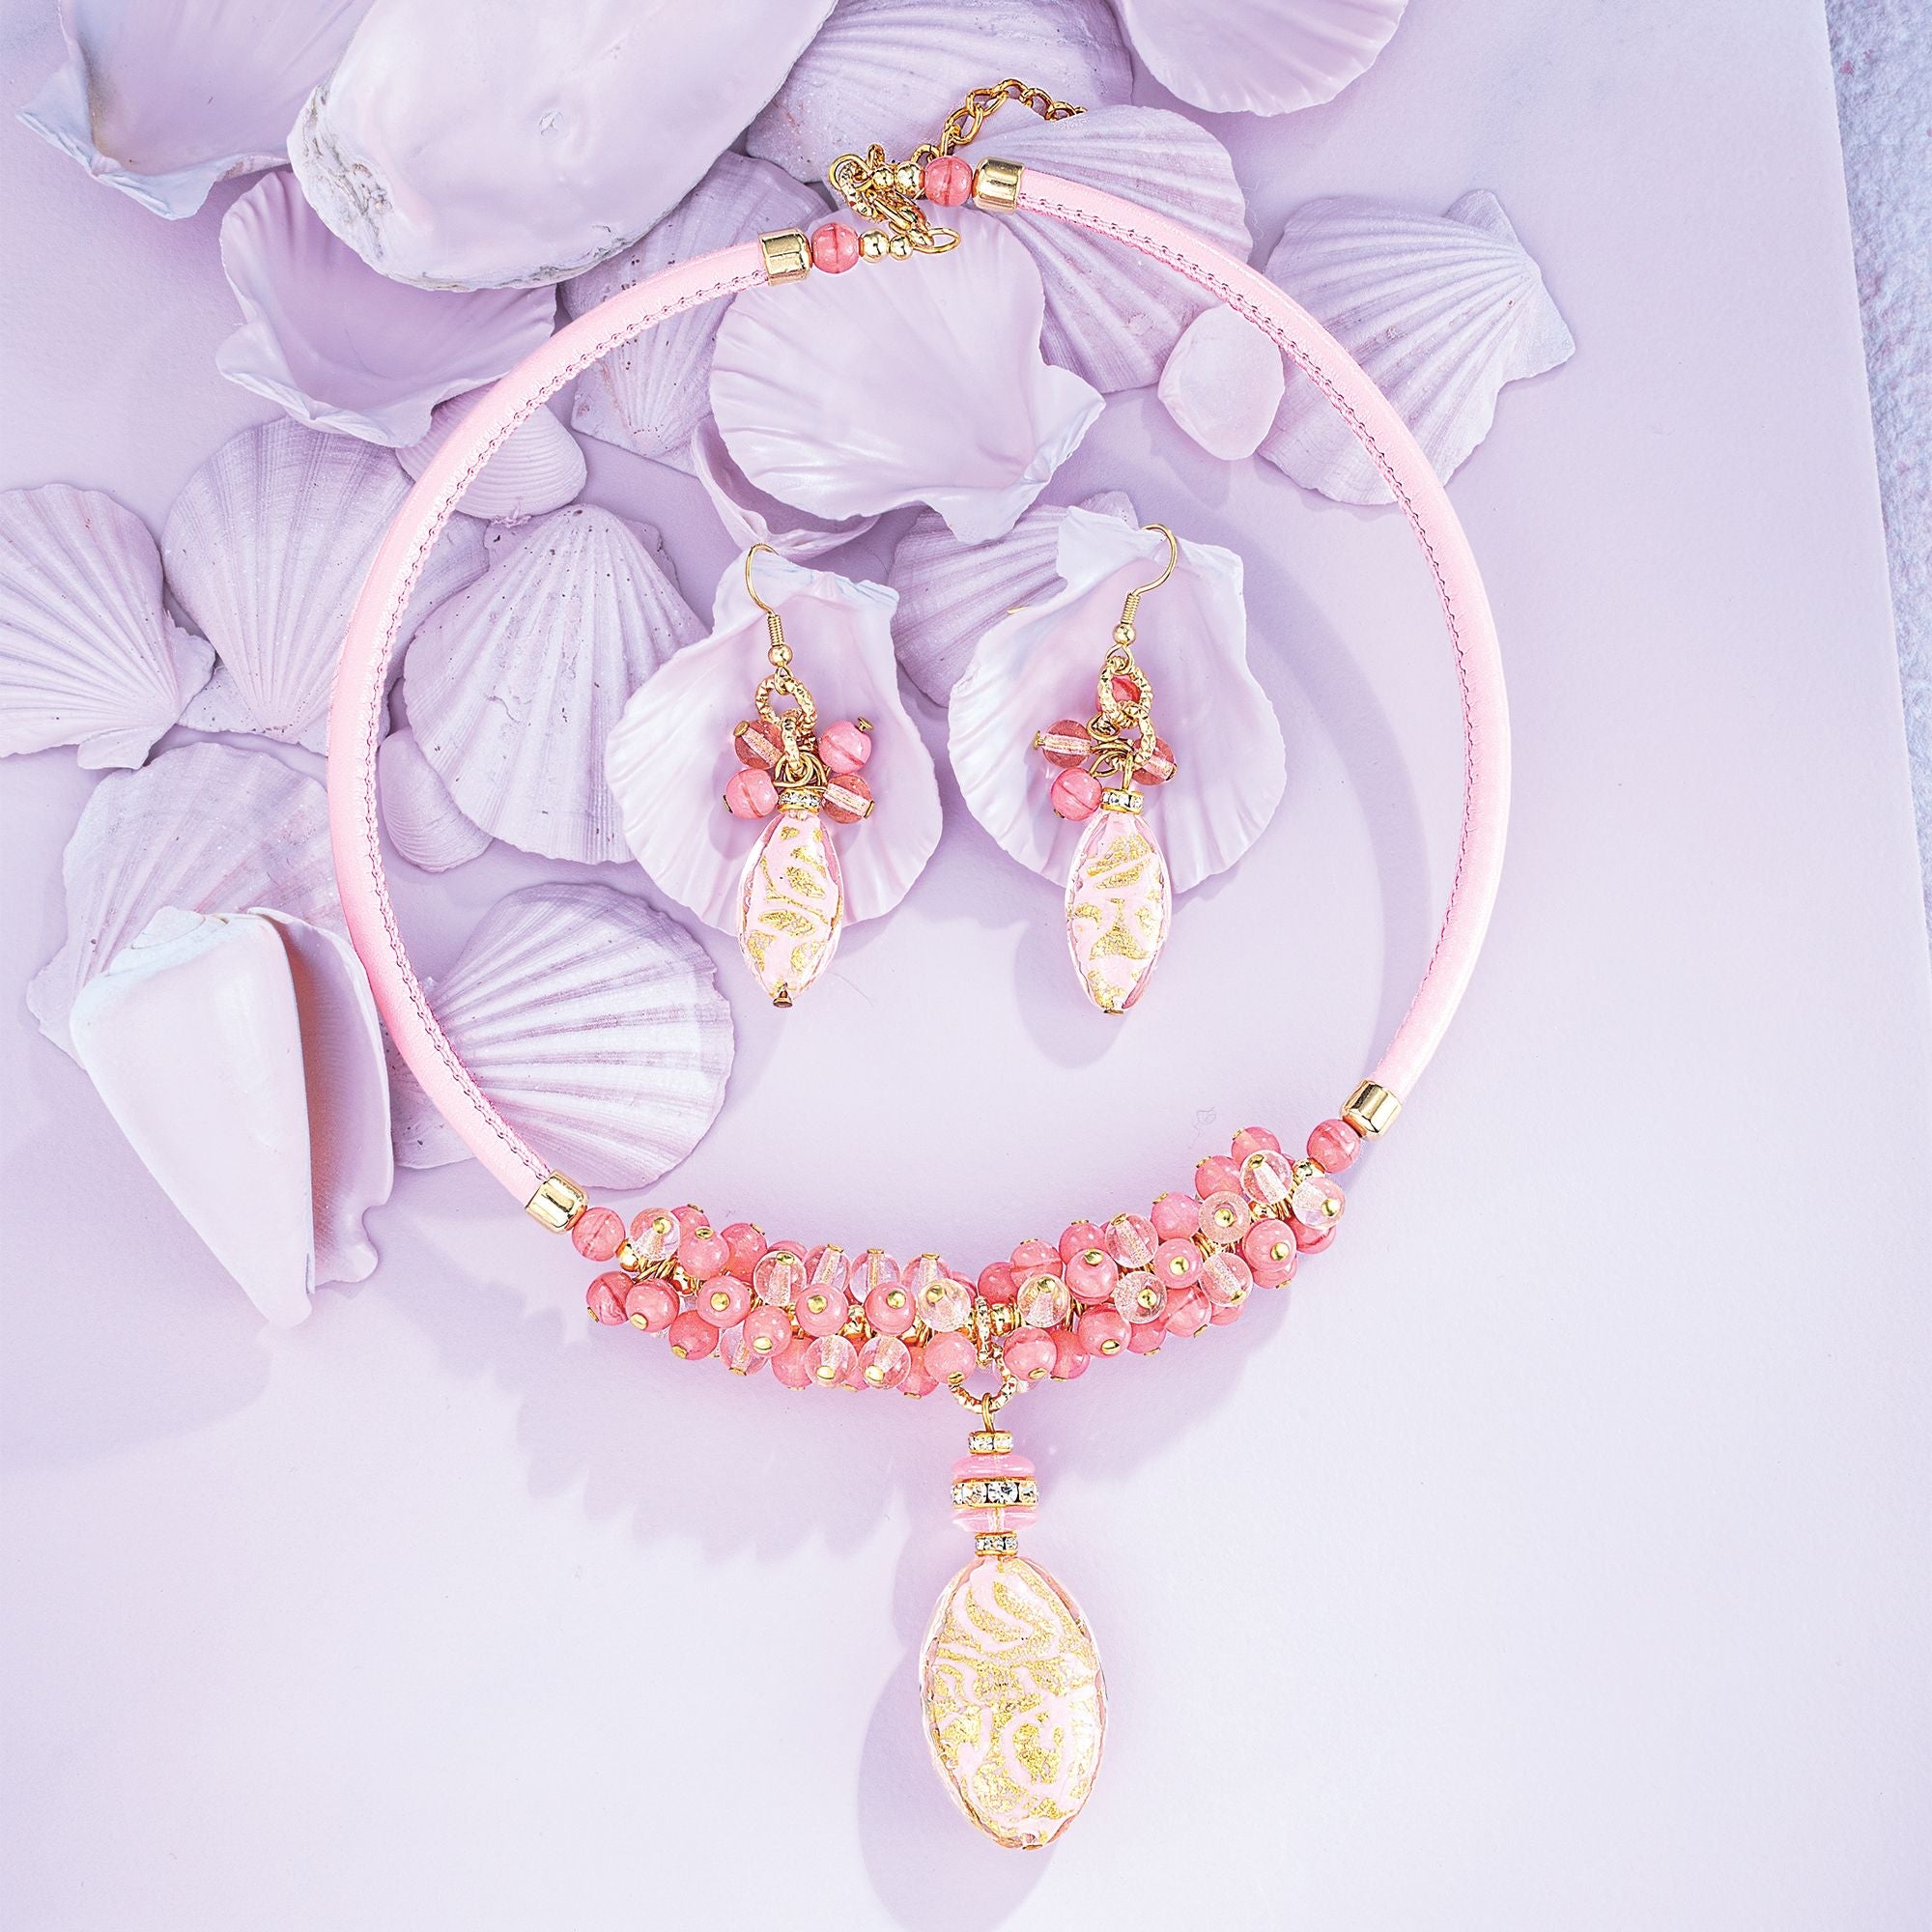 Bold Pink & Gold Murano Glass Necklace